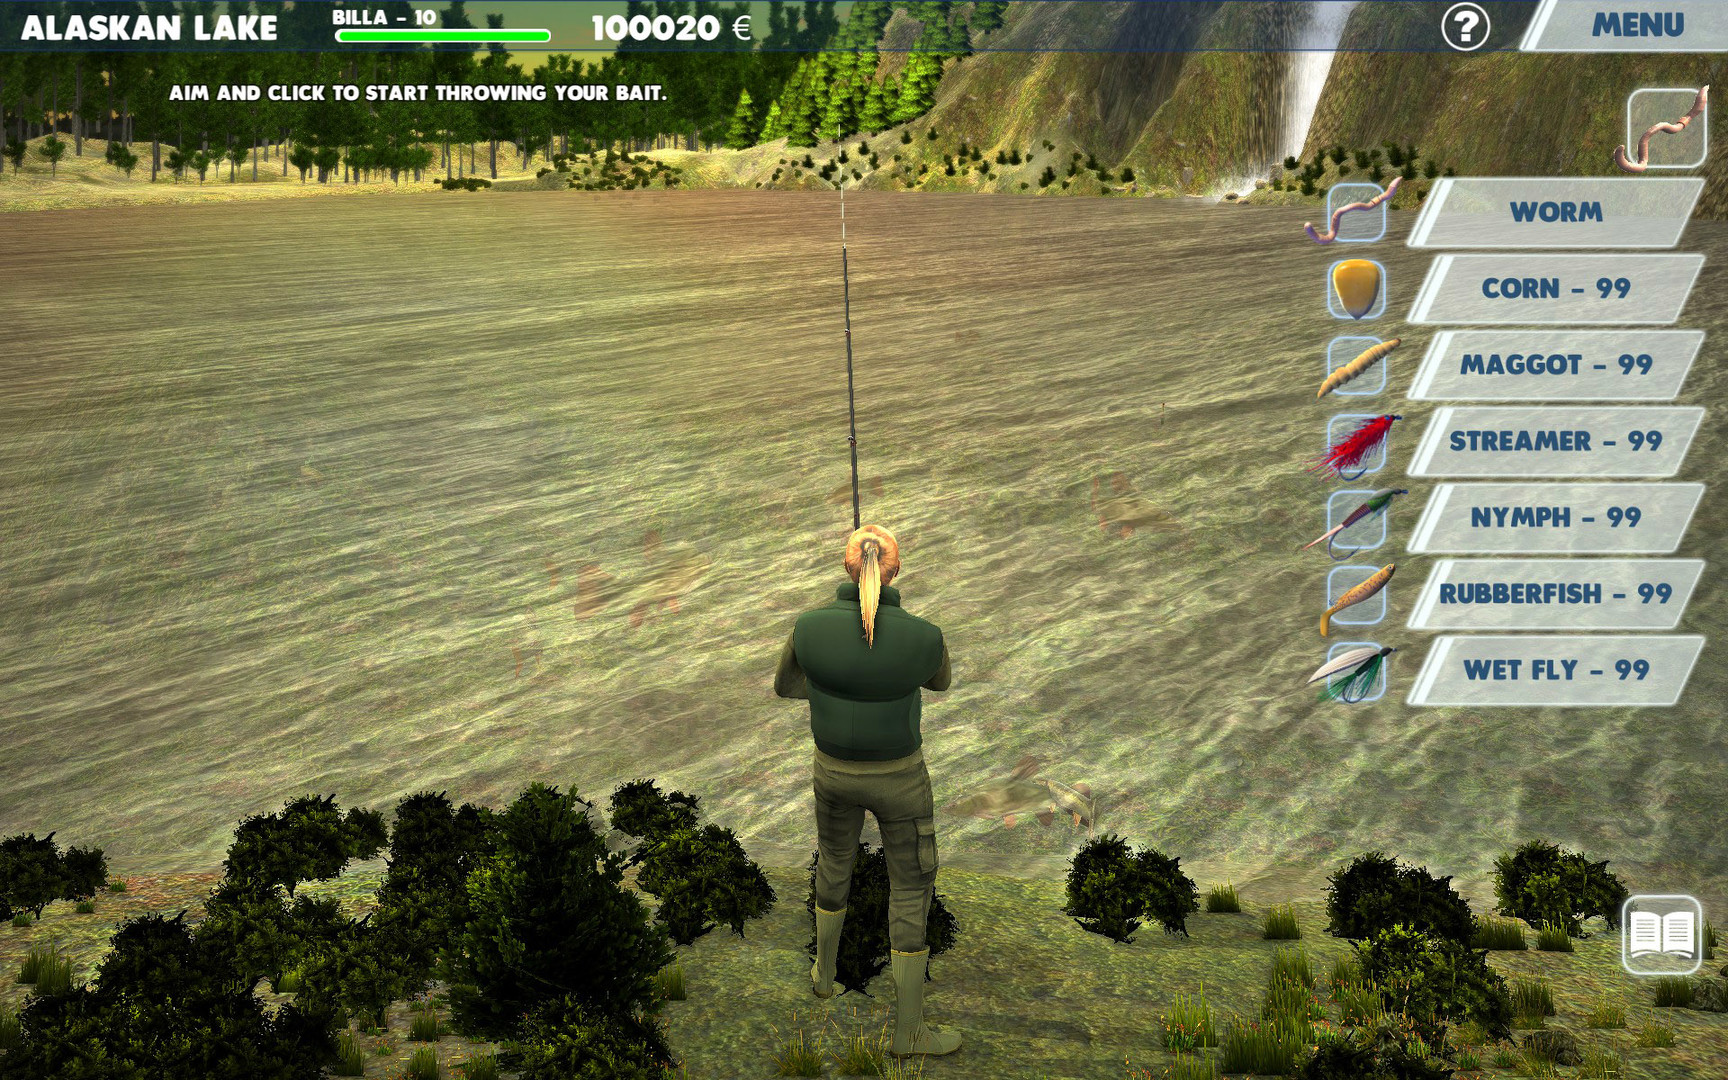 Arcade Fishing instal the new version for iphone